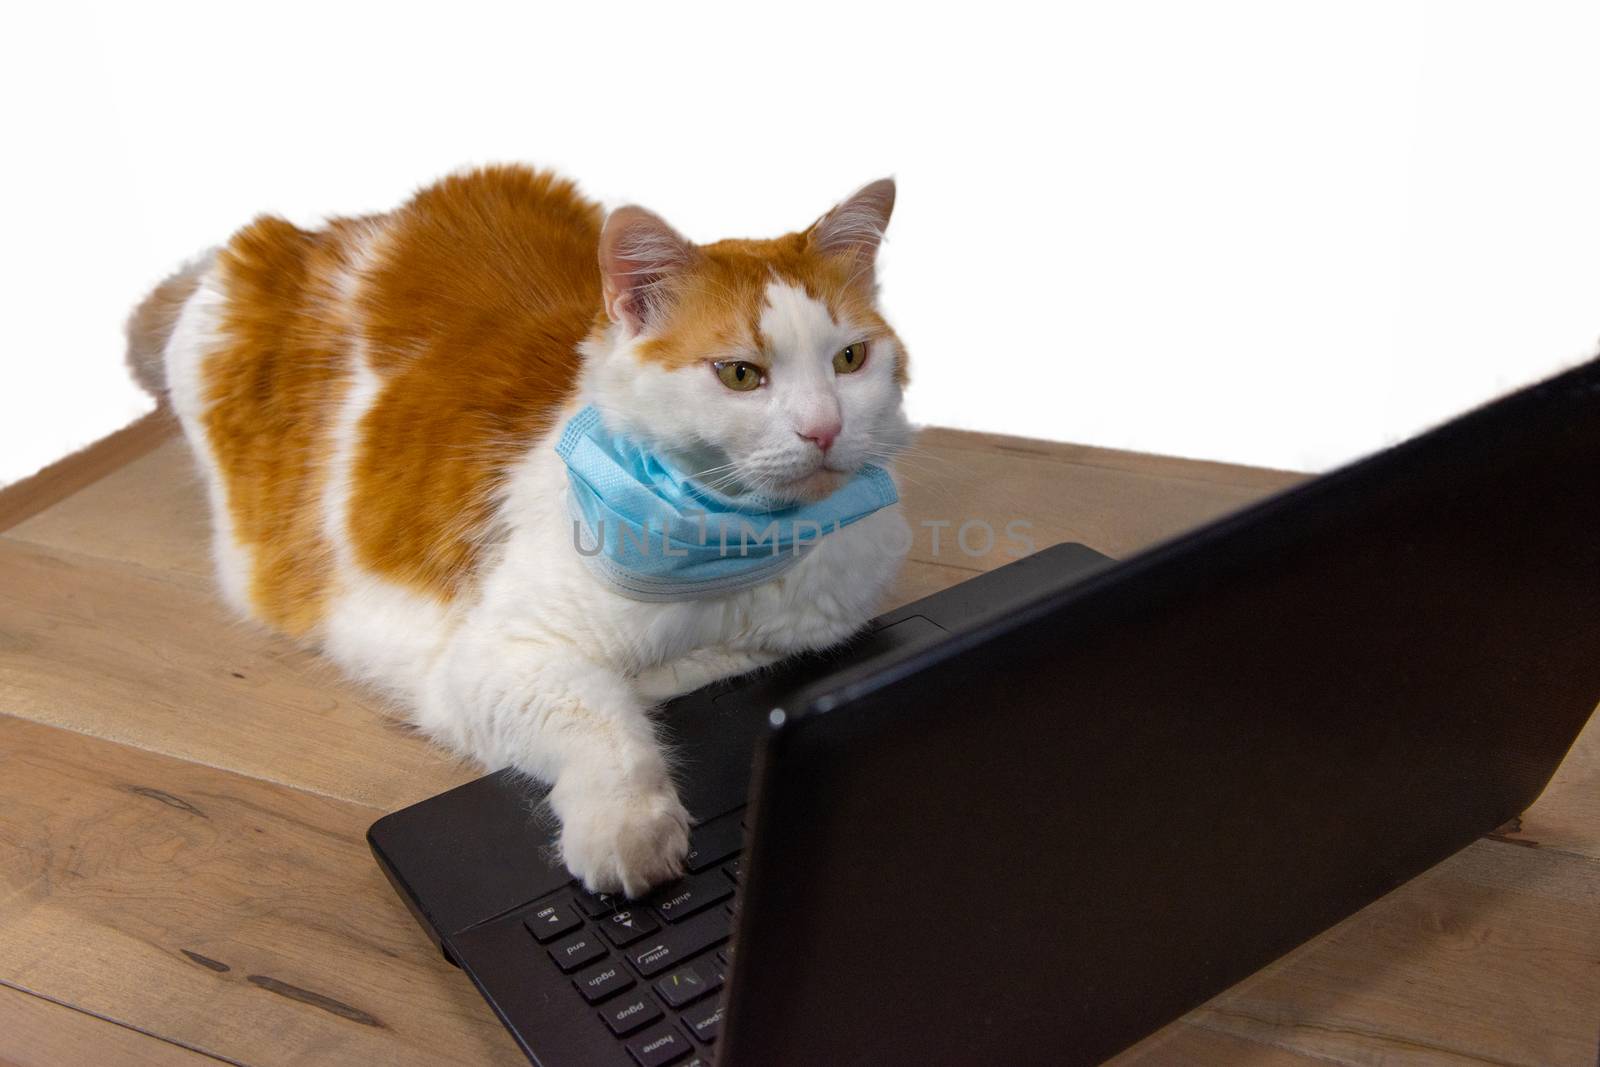 Internet News for Cats by ben44